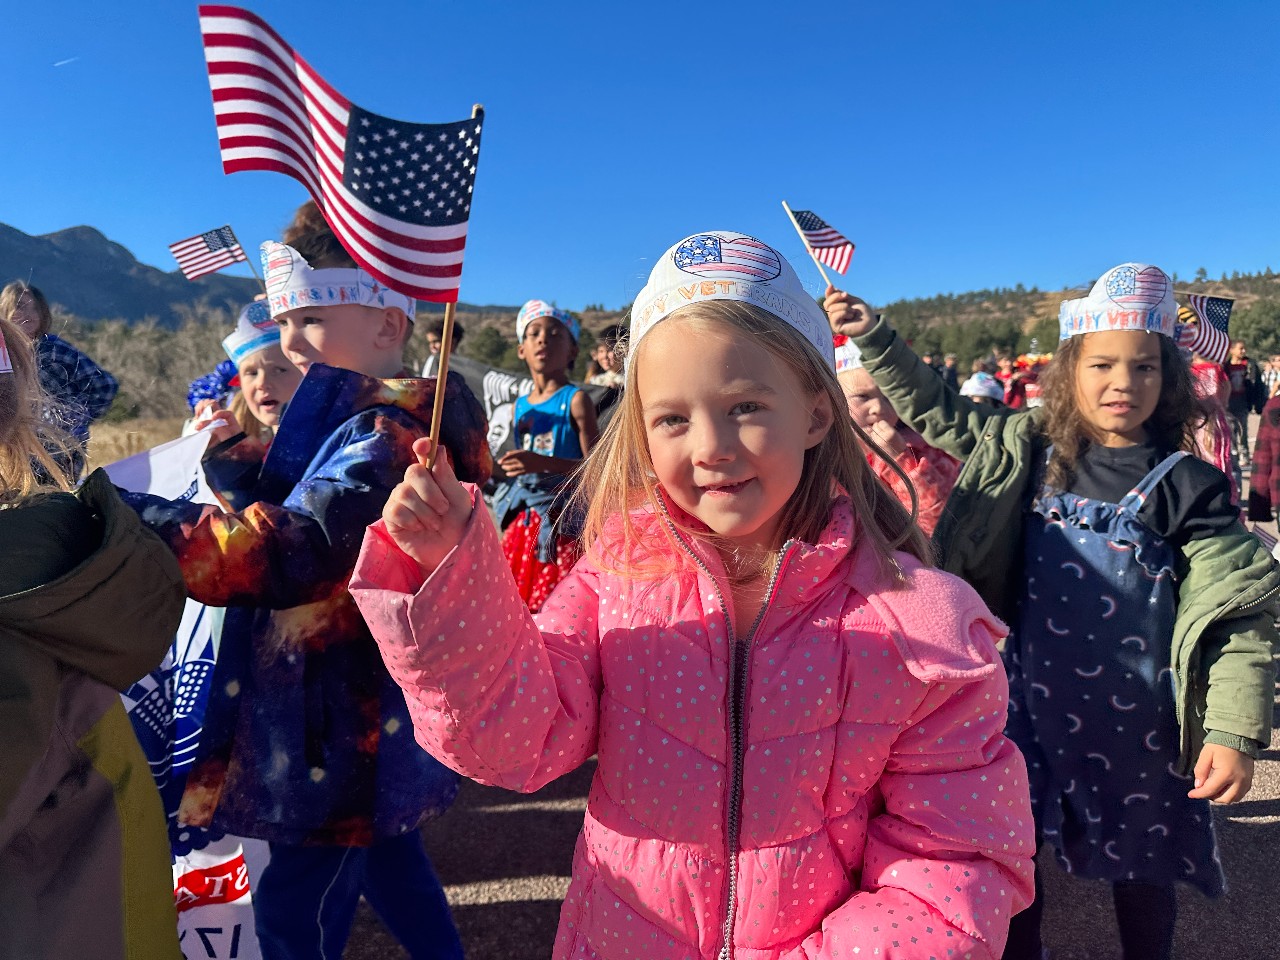 A girl holding a USA flag during the veteran's day parade